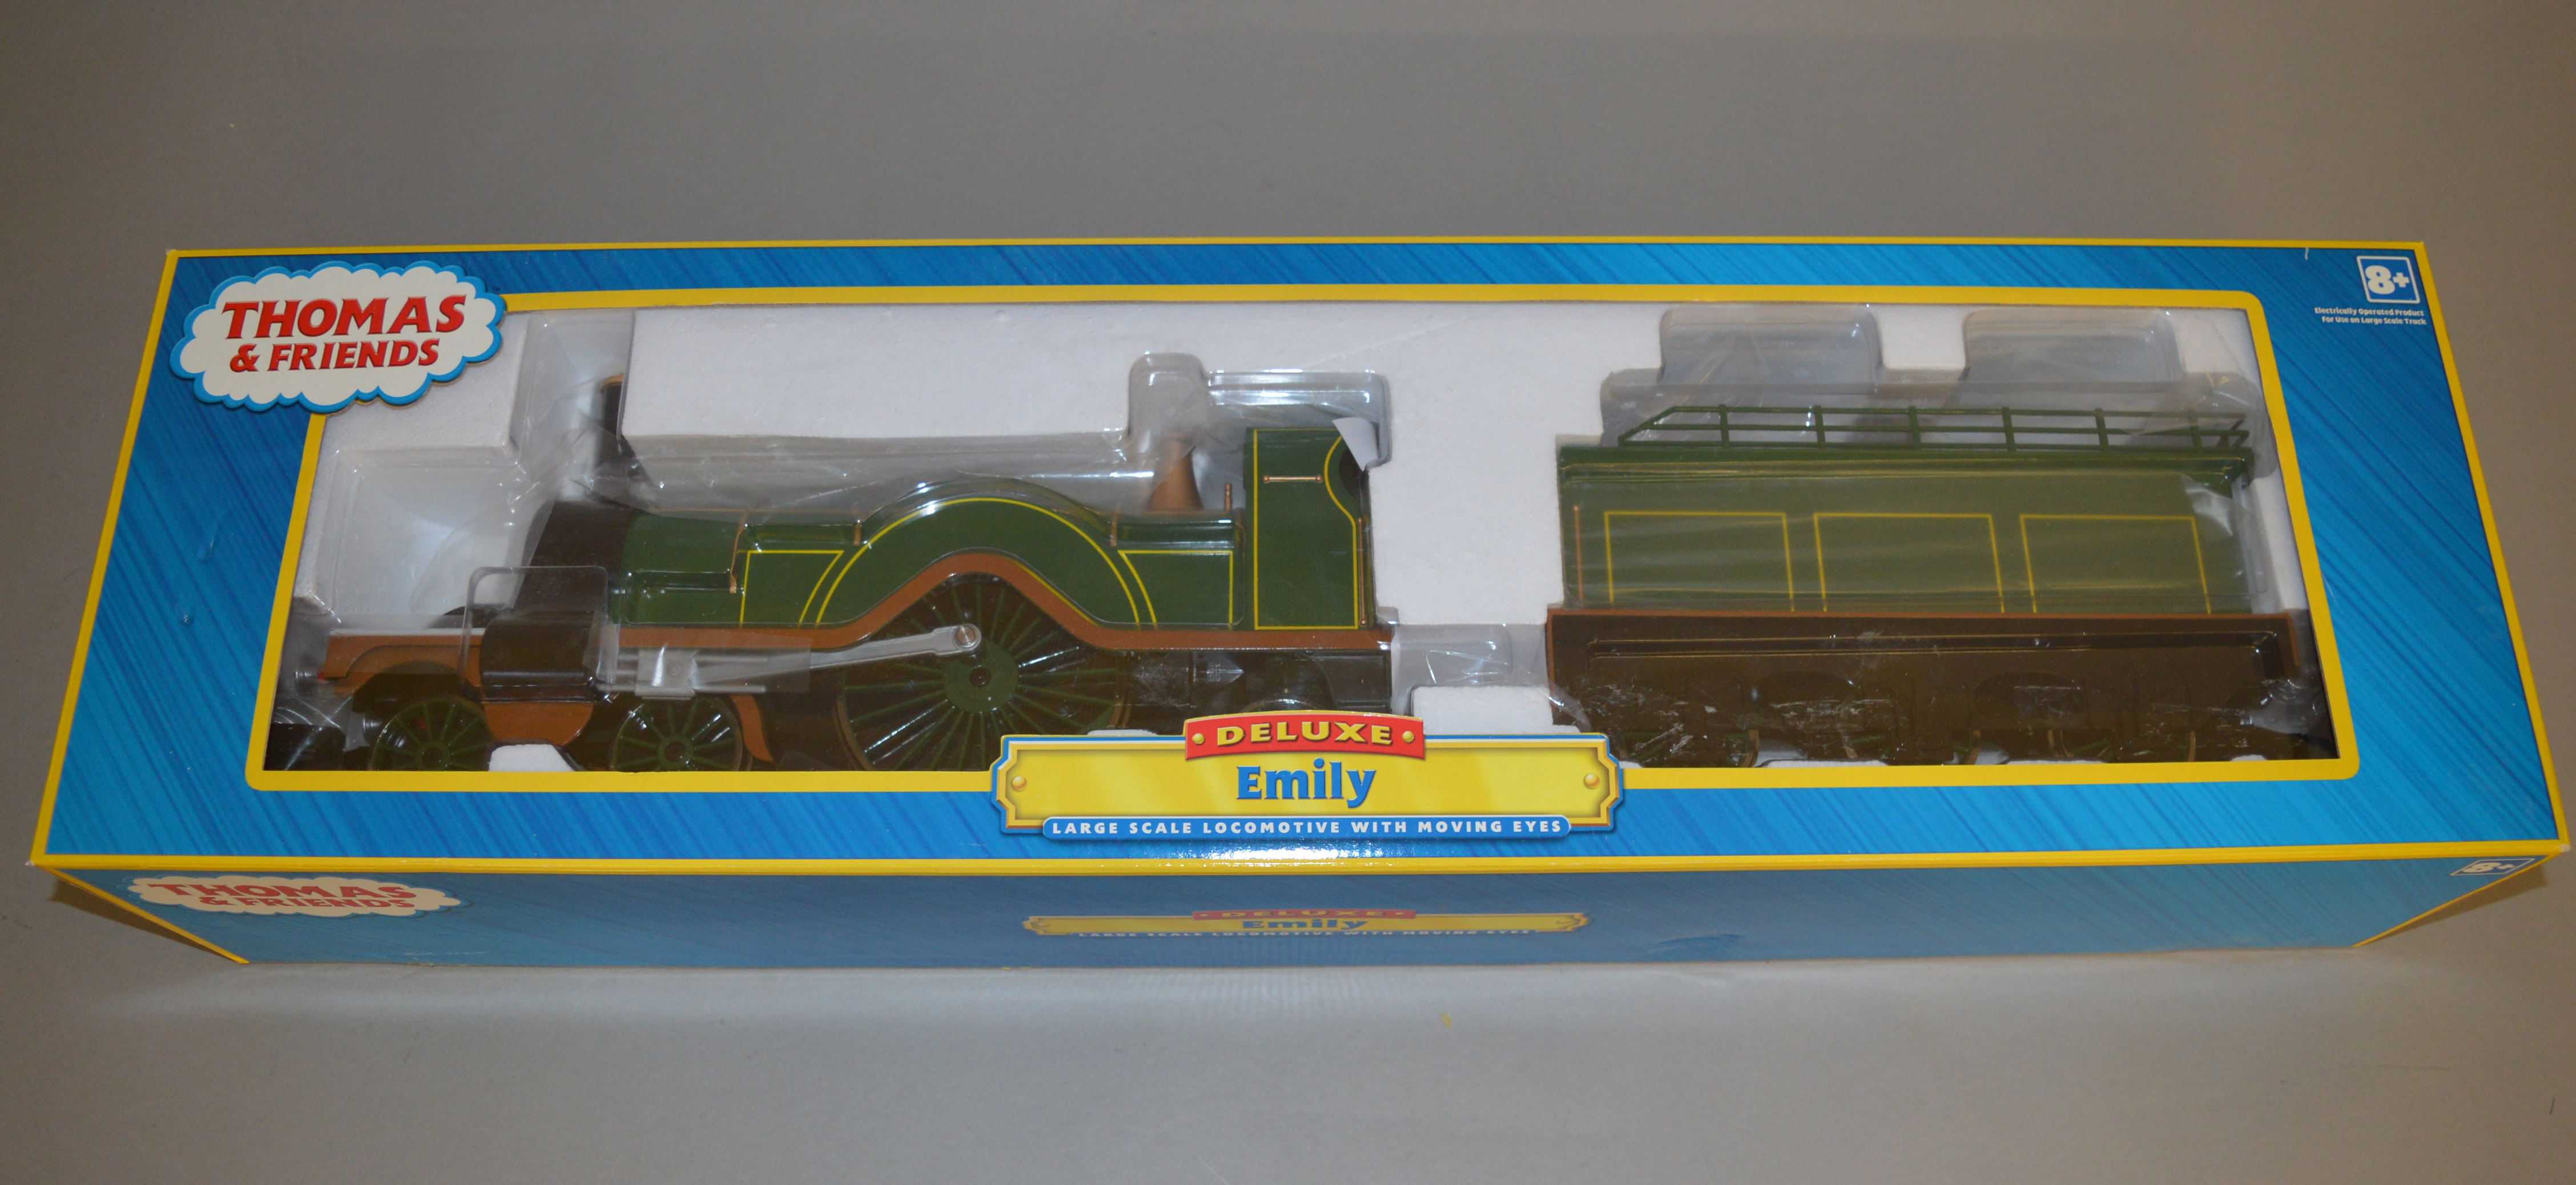 G gauge. Bachmann Thomas and Friends Deluxe Emily locomotive. Boxed and E.